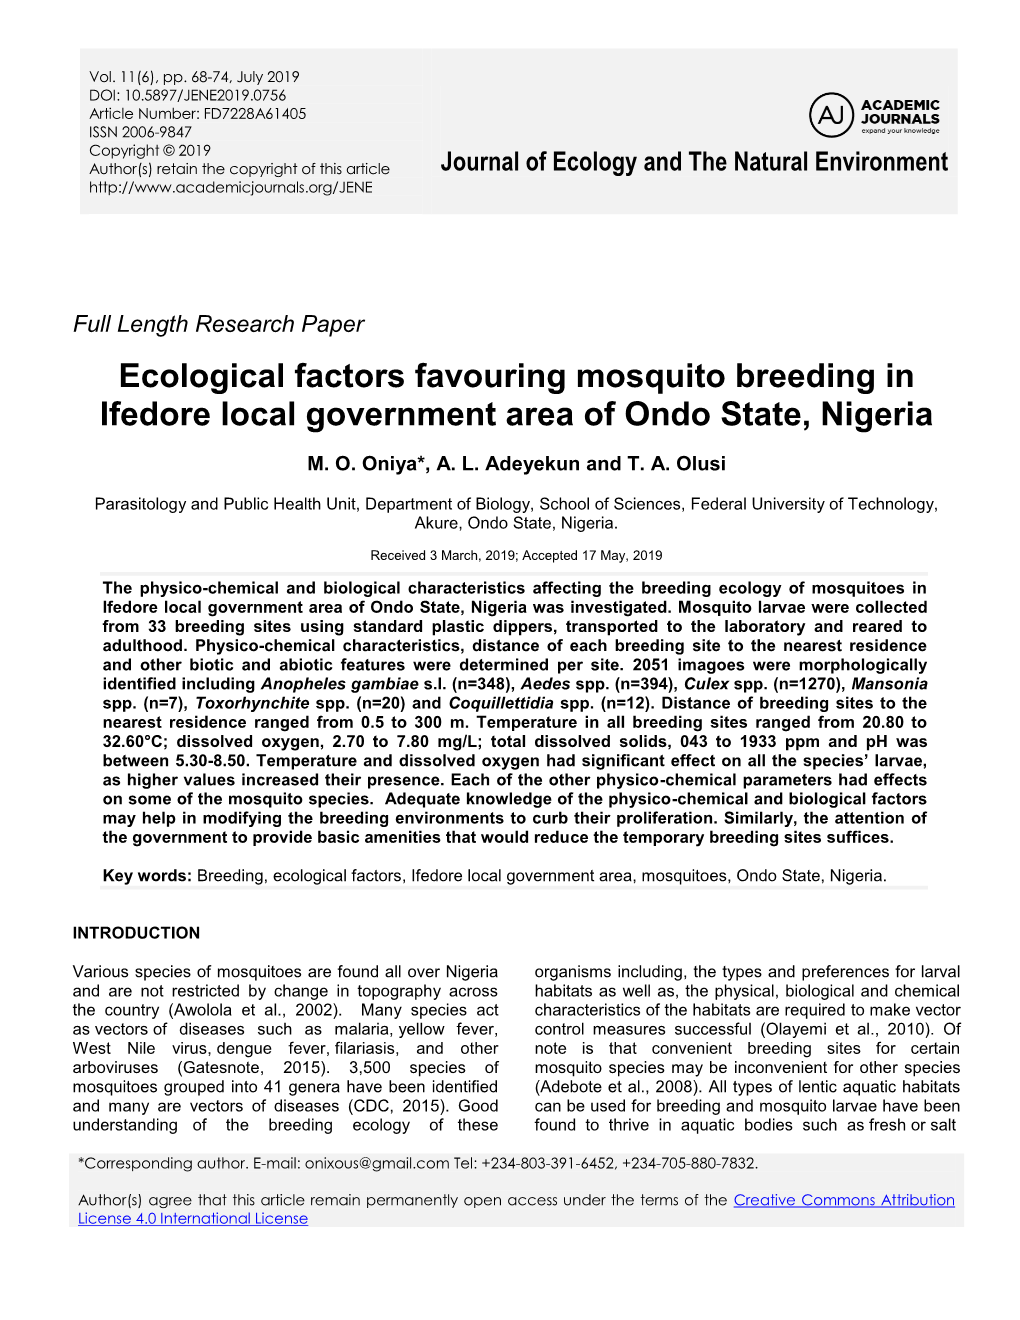 Ecological Factors Favouring Mosquito Breeding in Ifedore Local Government Area of Ondo State, Nigeria